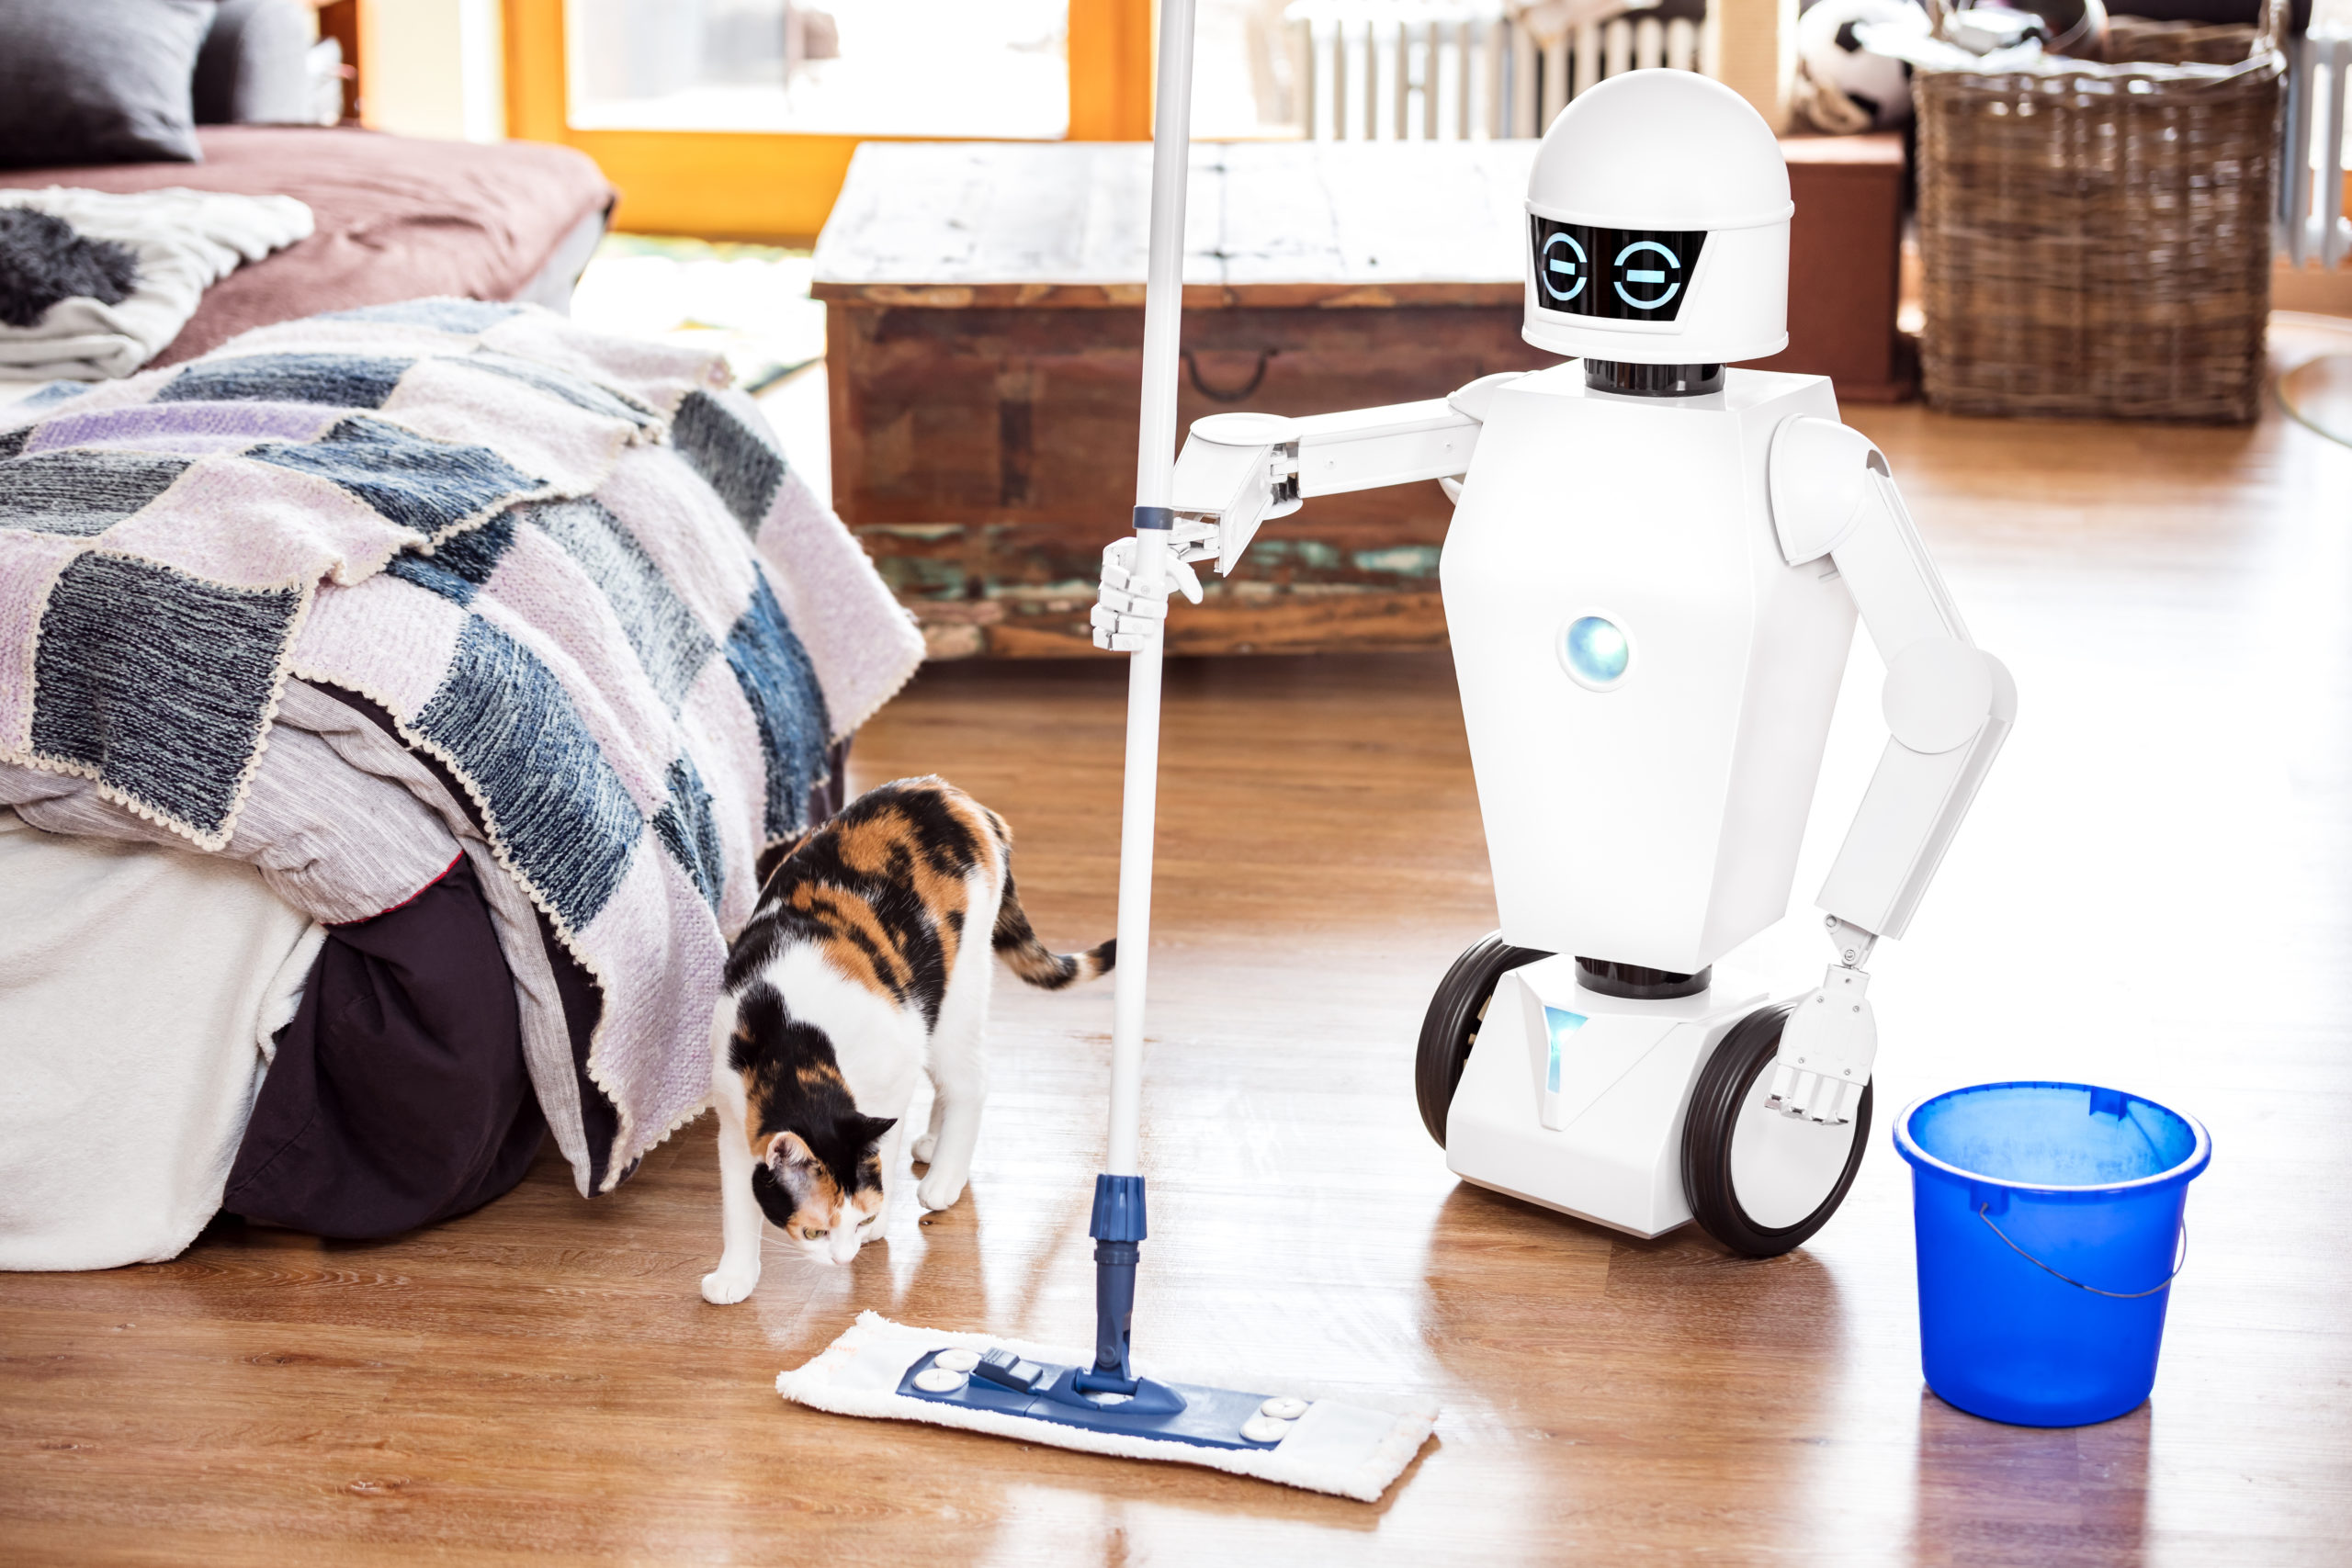 Hound Konsekvent Fremme Are Service Robotics the Future for Home Robots? - NAI Group